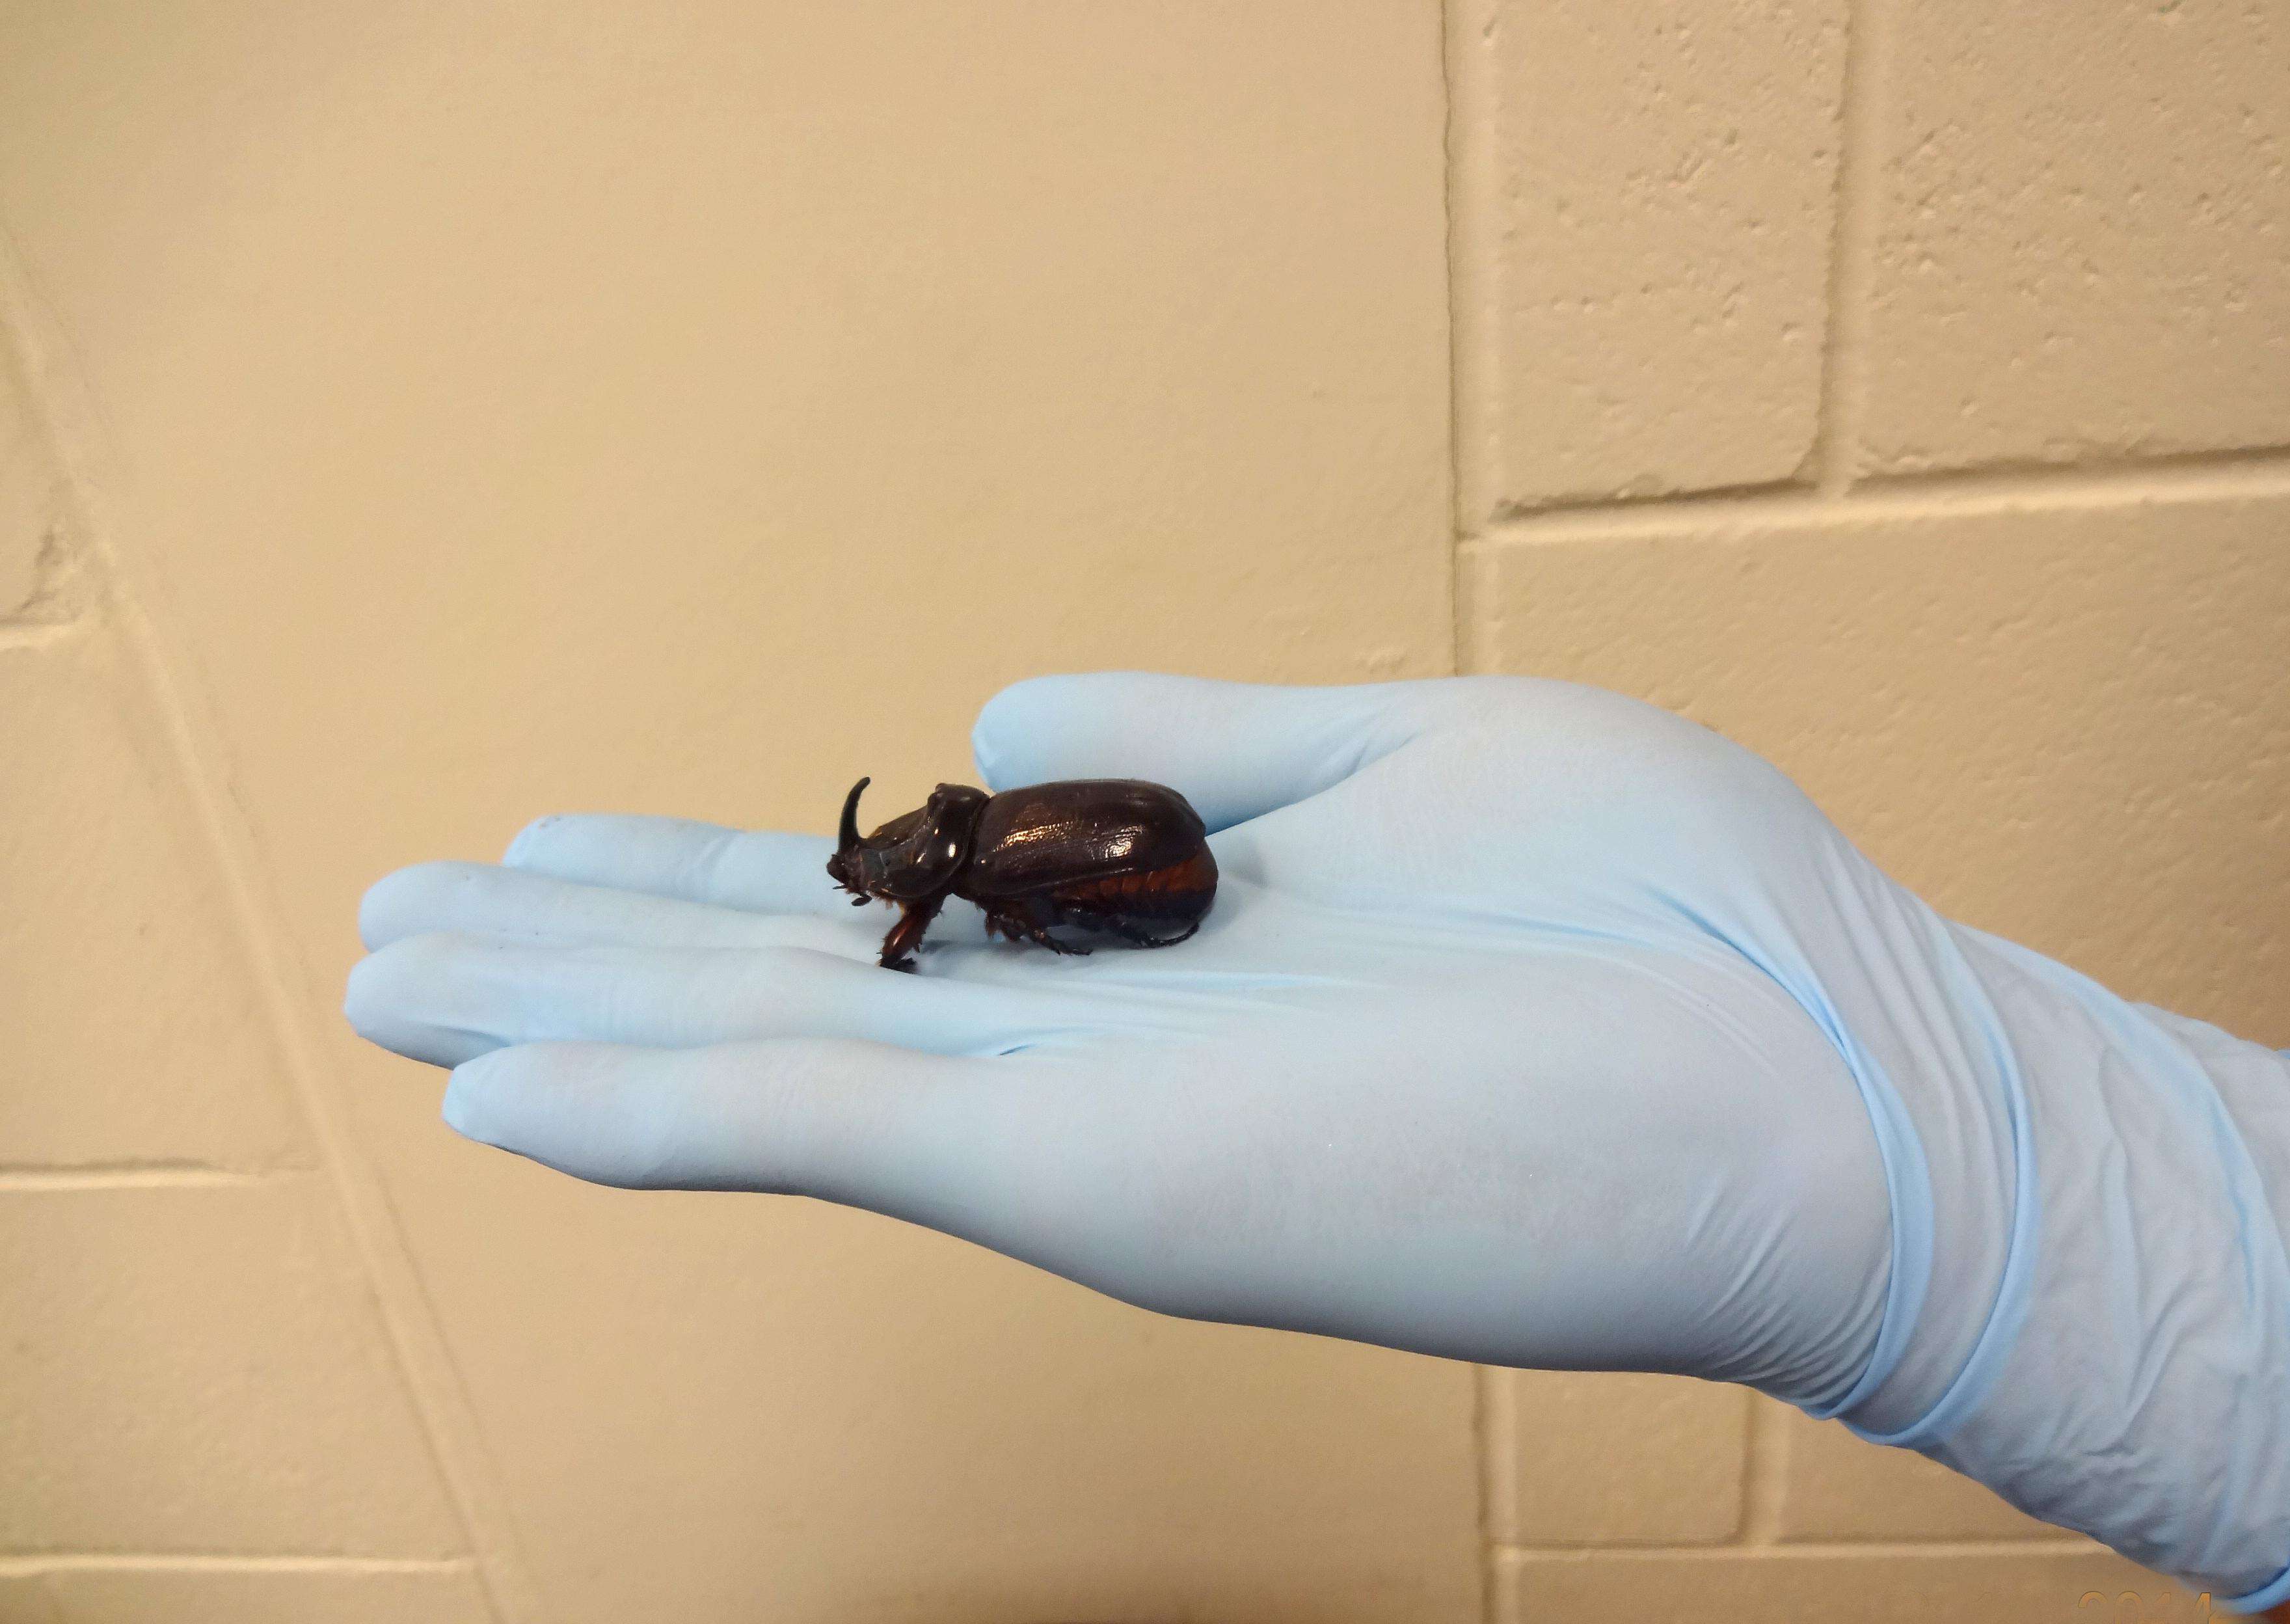 Male coconut rhinoceros beetle on a person's gloved hand; beetle is brownish-black and measures about 2 inches long.